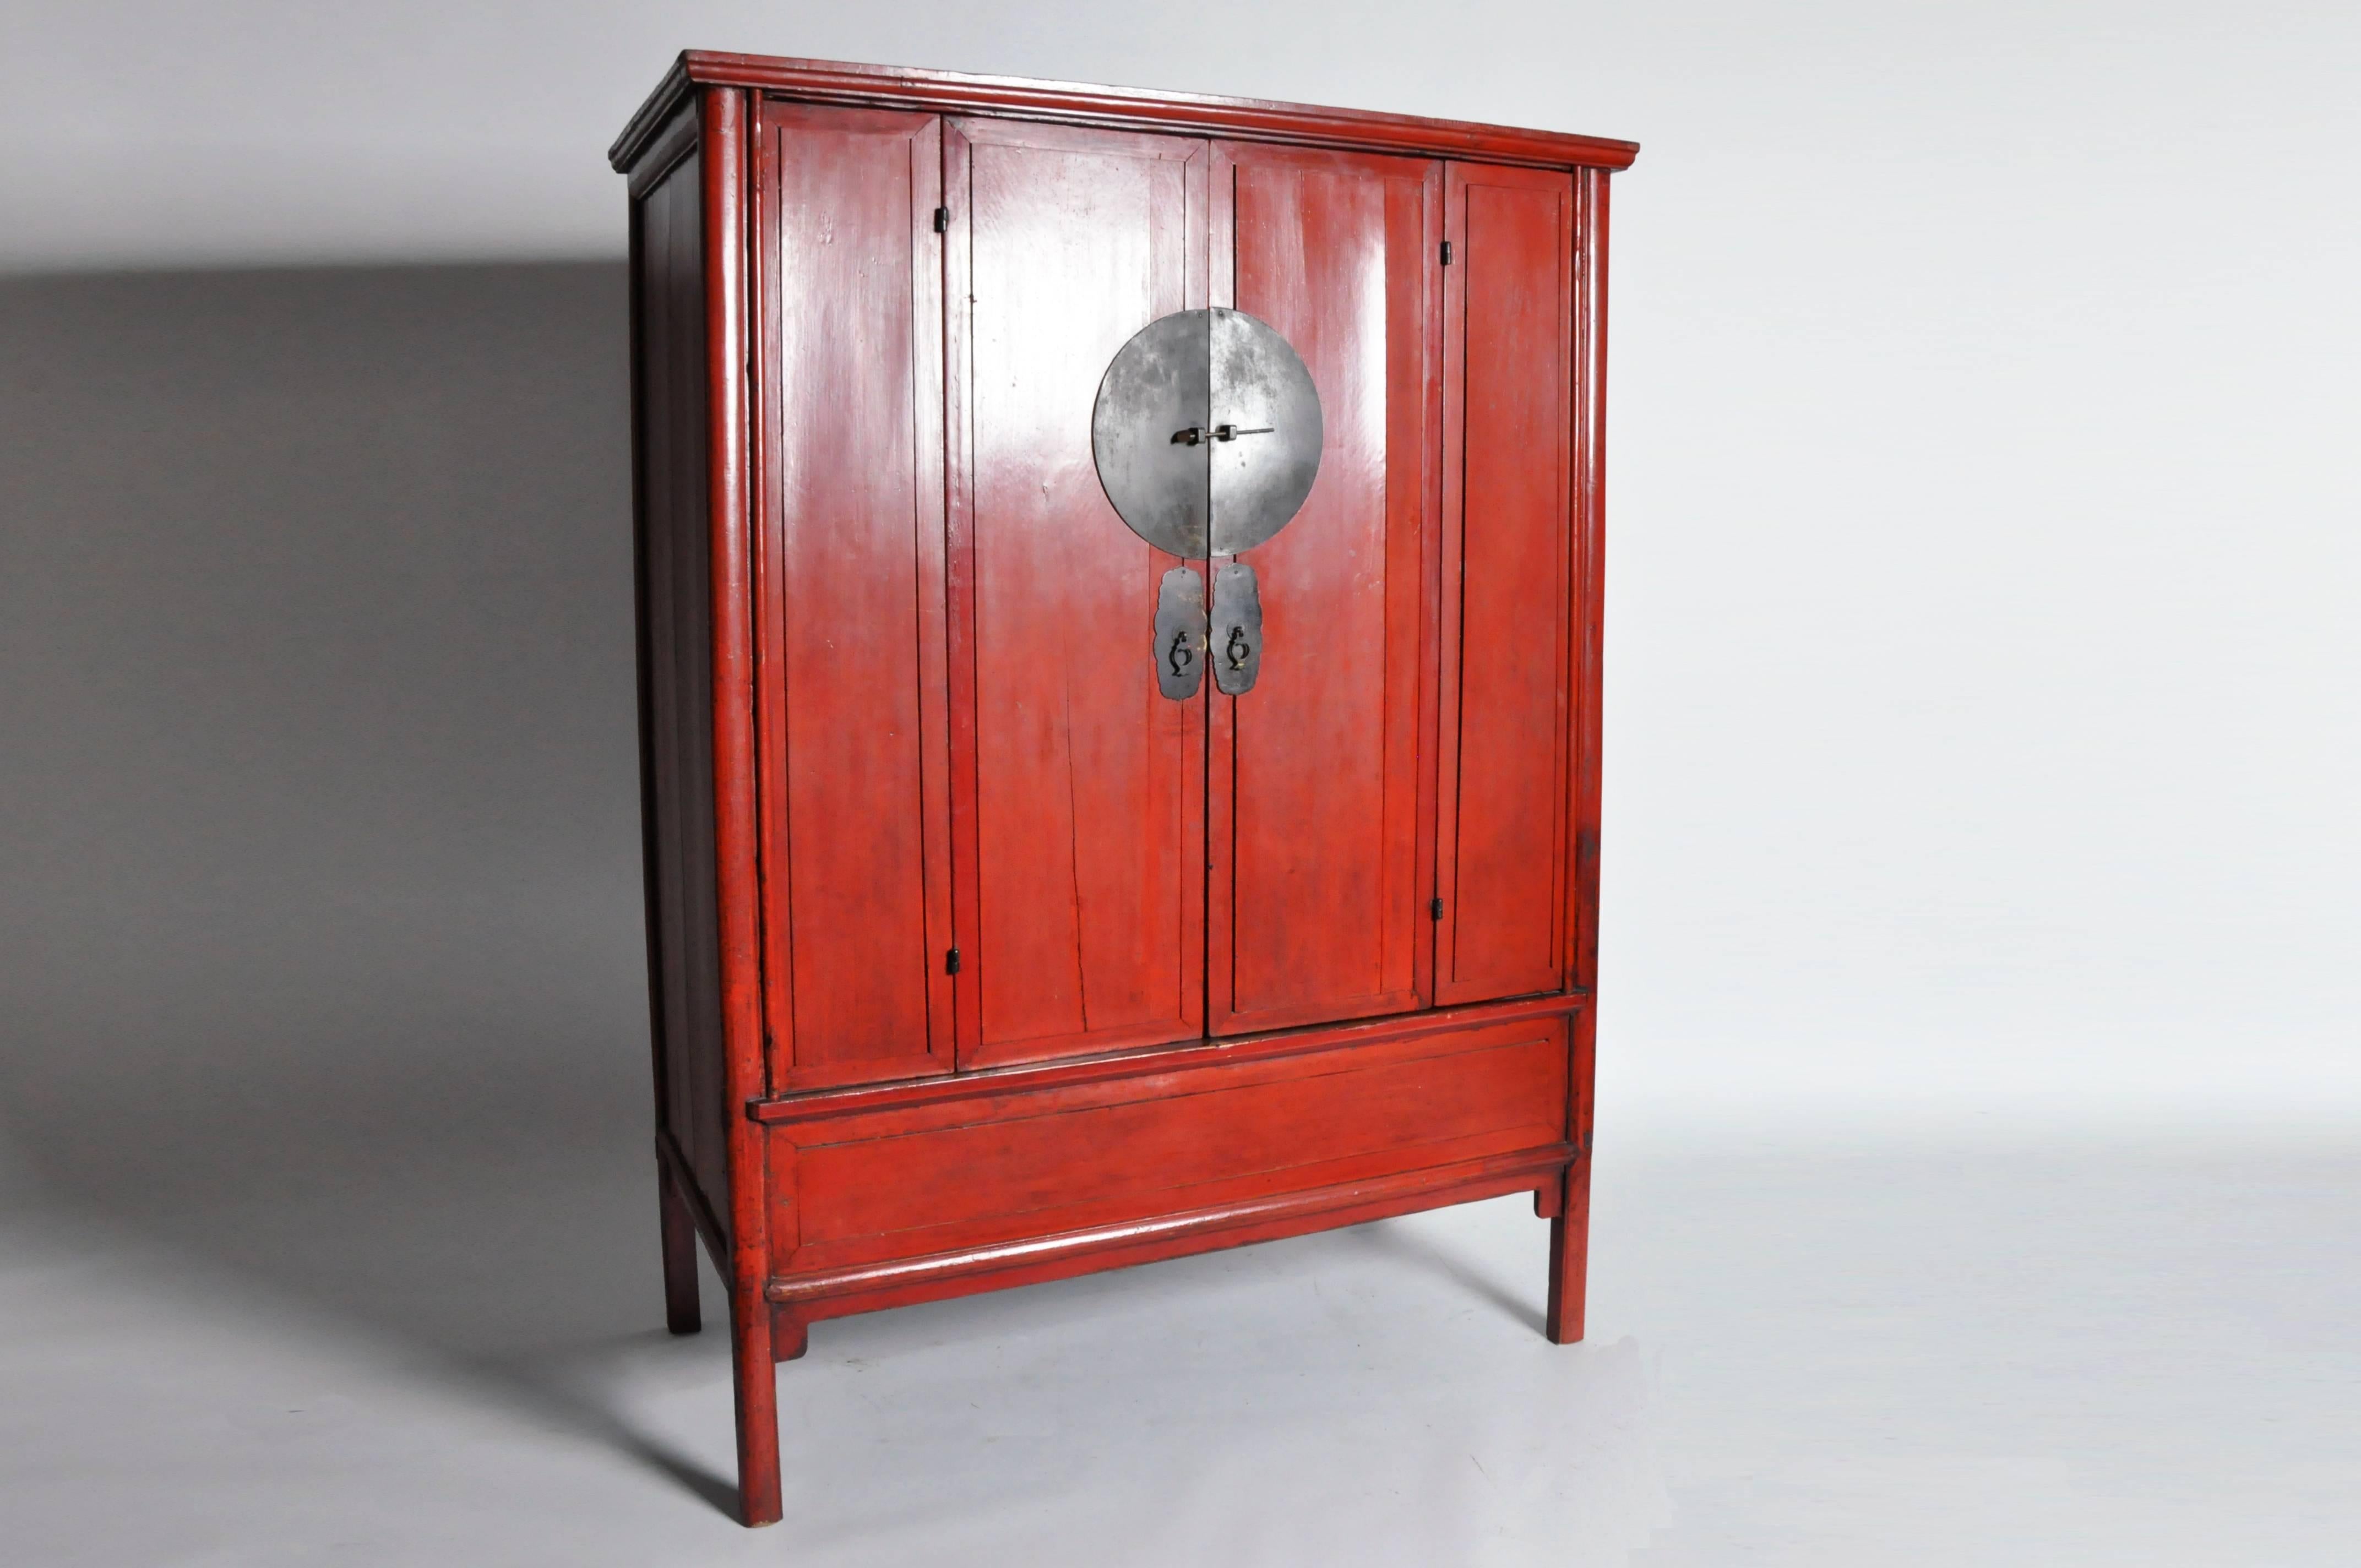 This impressive Chinese armoire is made from red lacquer over elmwood. This piece features with two bi-fold doors, two shelves, and a hidden compartment below.